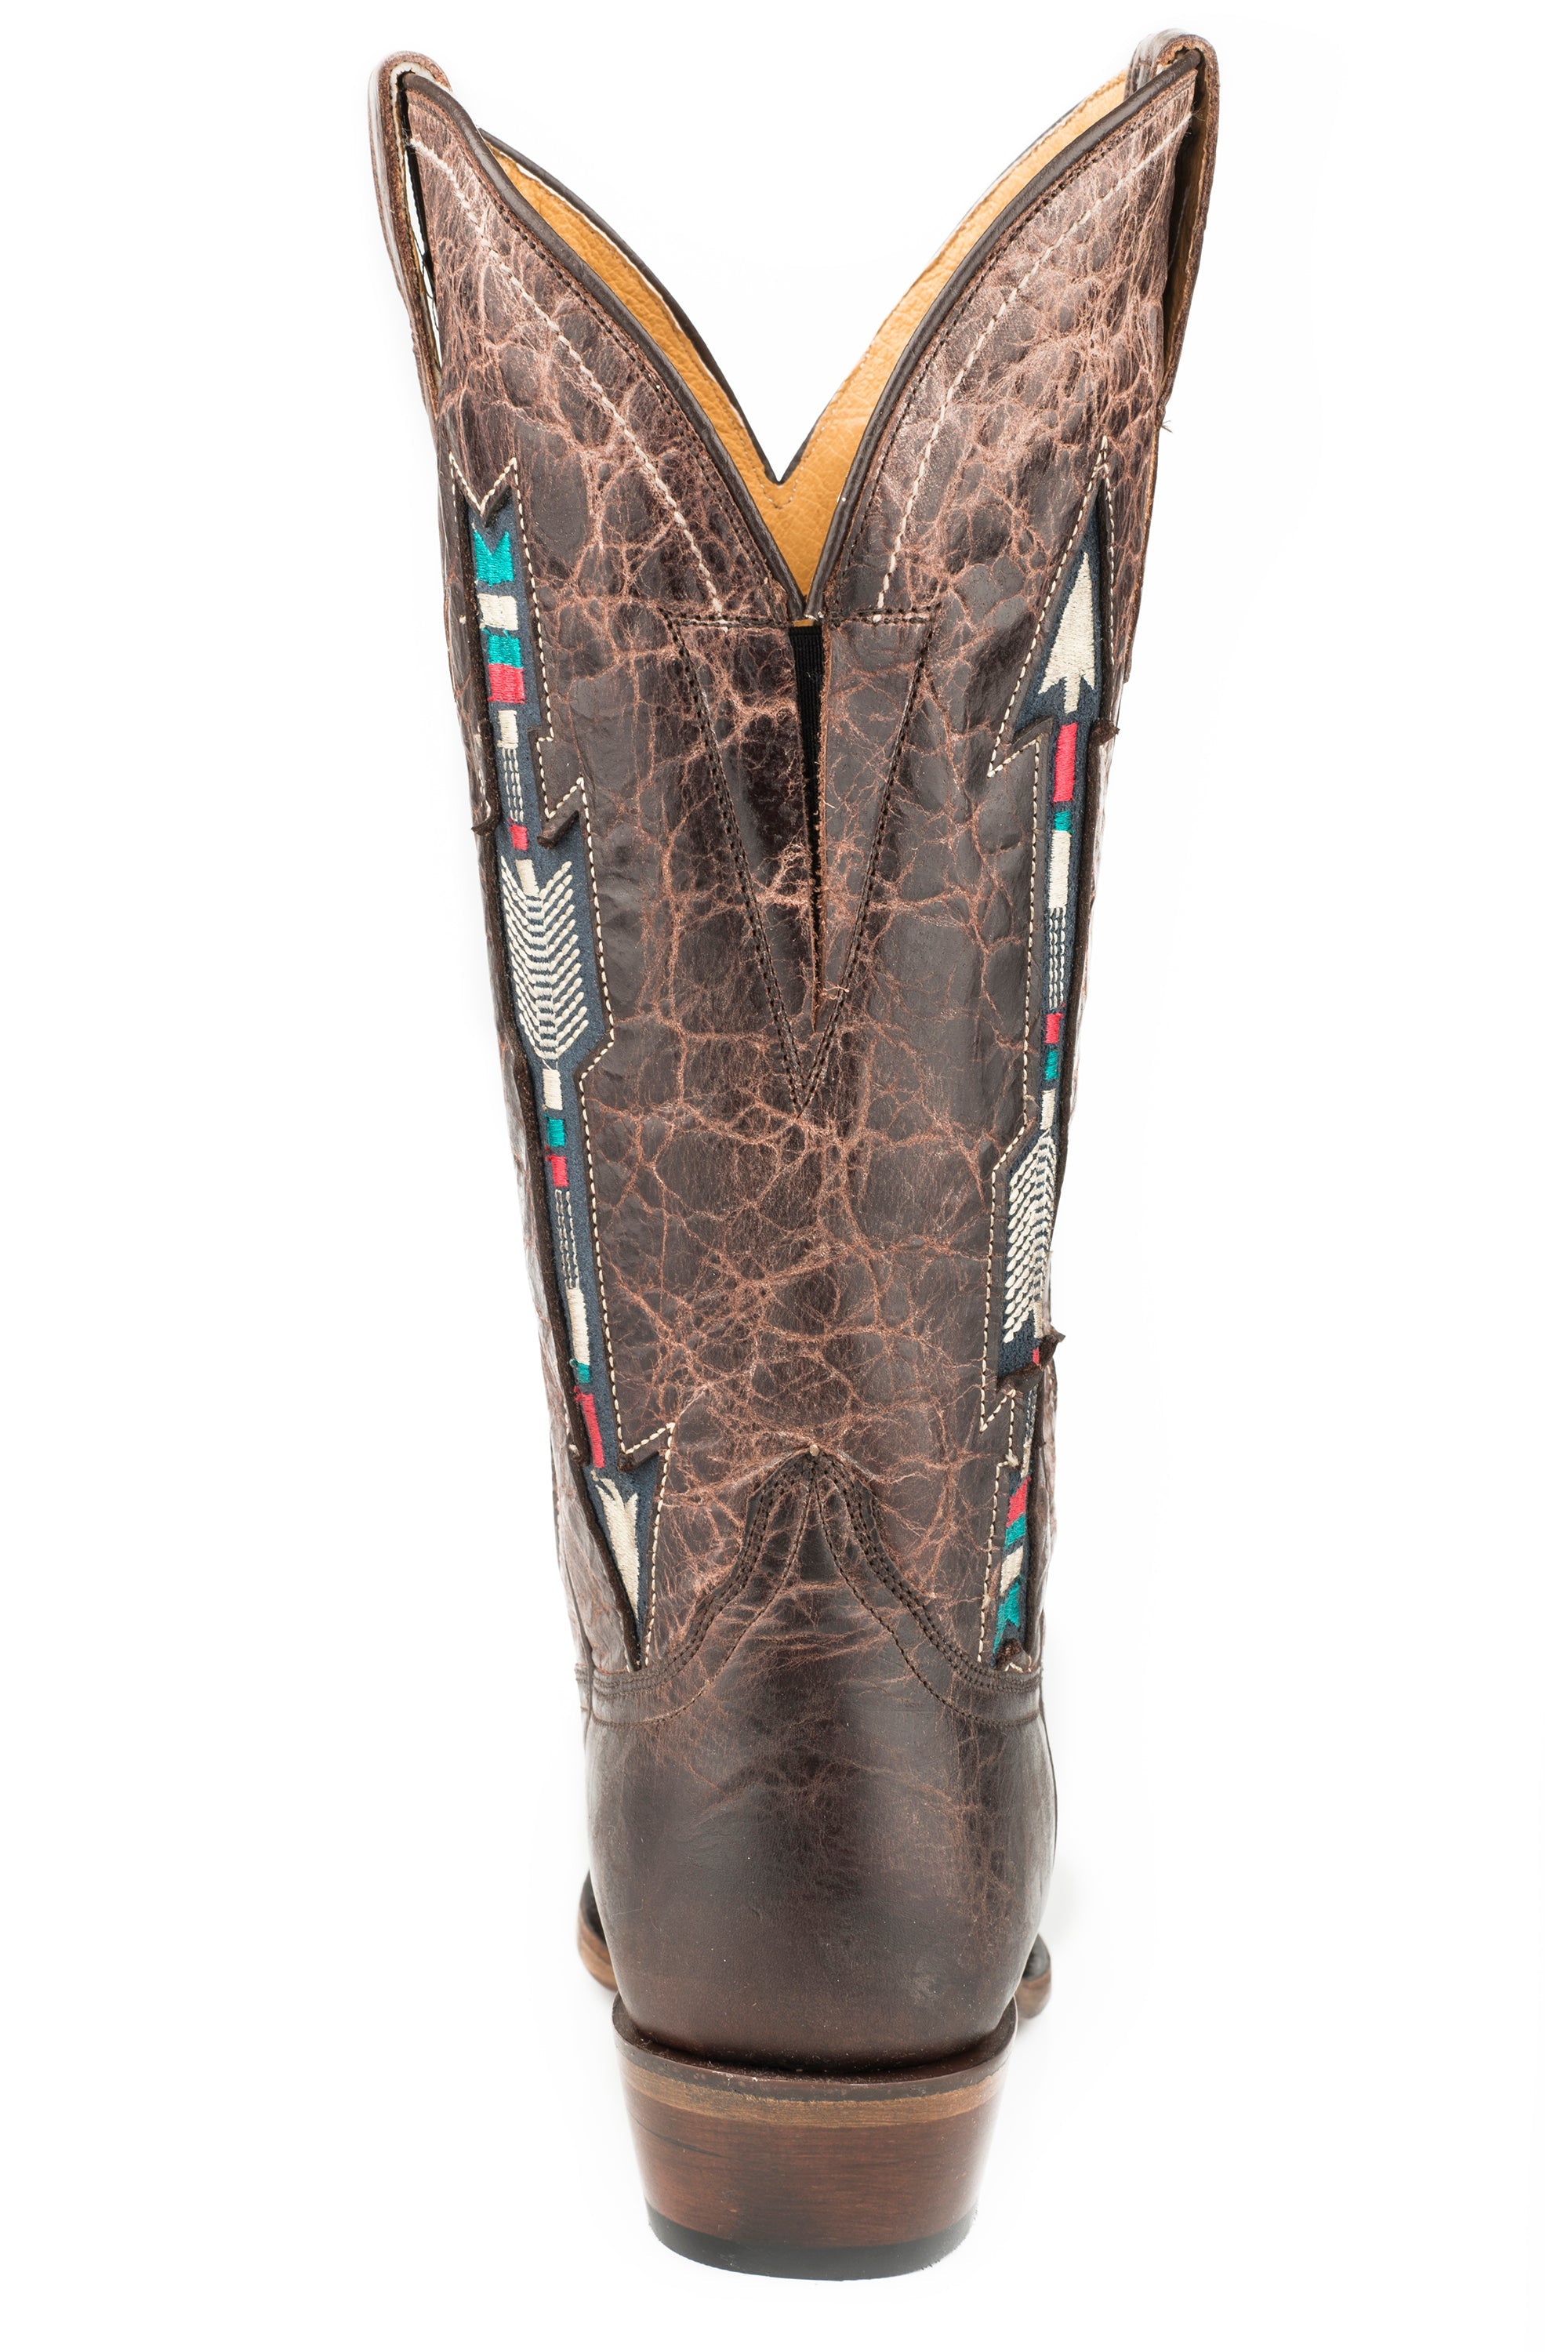 Roper Womens Wide Calf Leather Cowboy Boot Waxy Brown With Embroidered Arrow Underlay Design